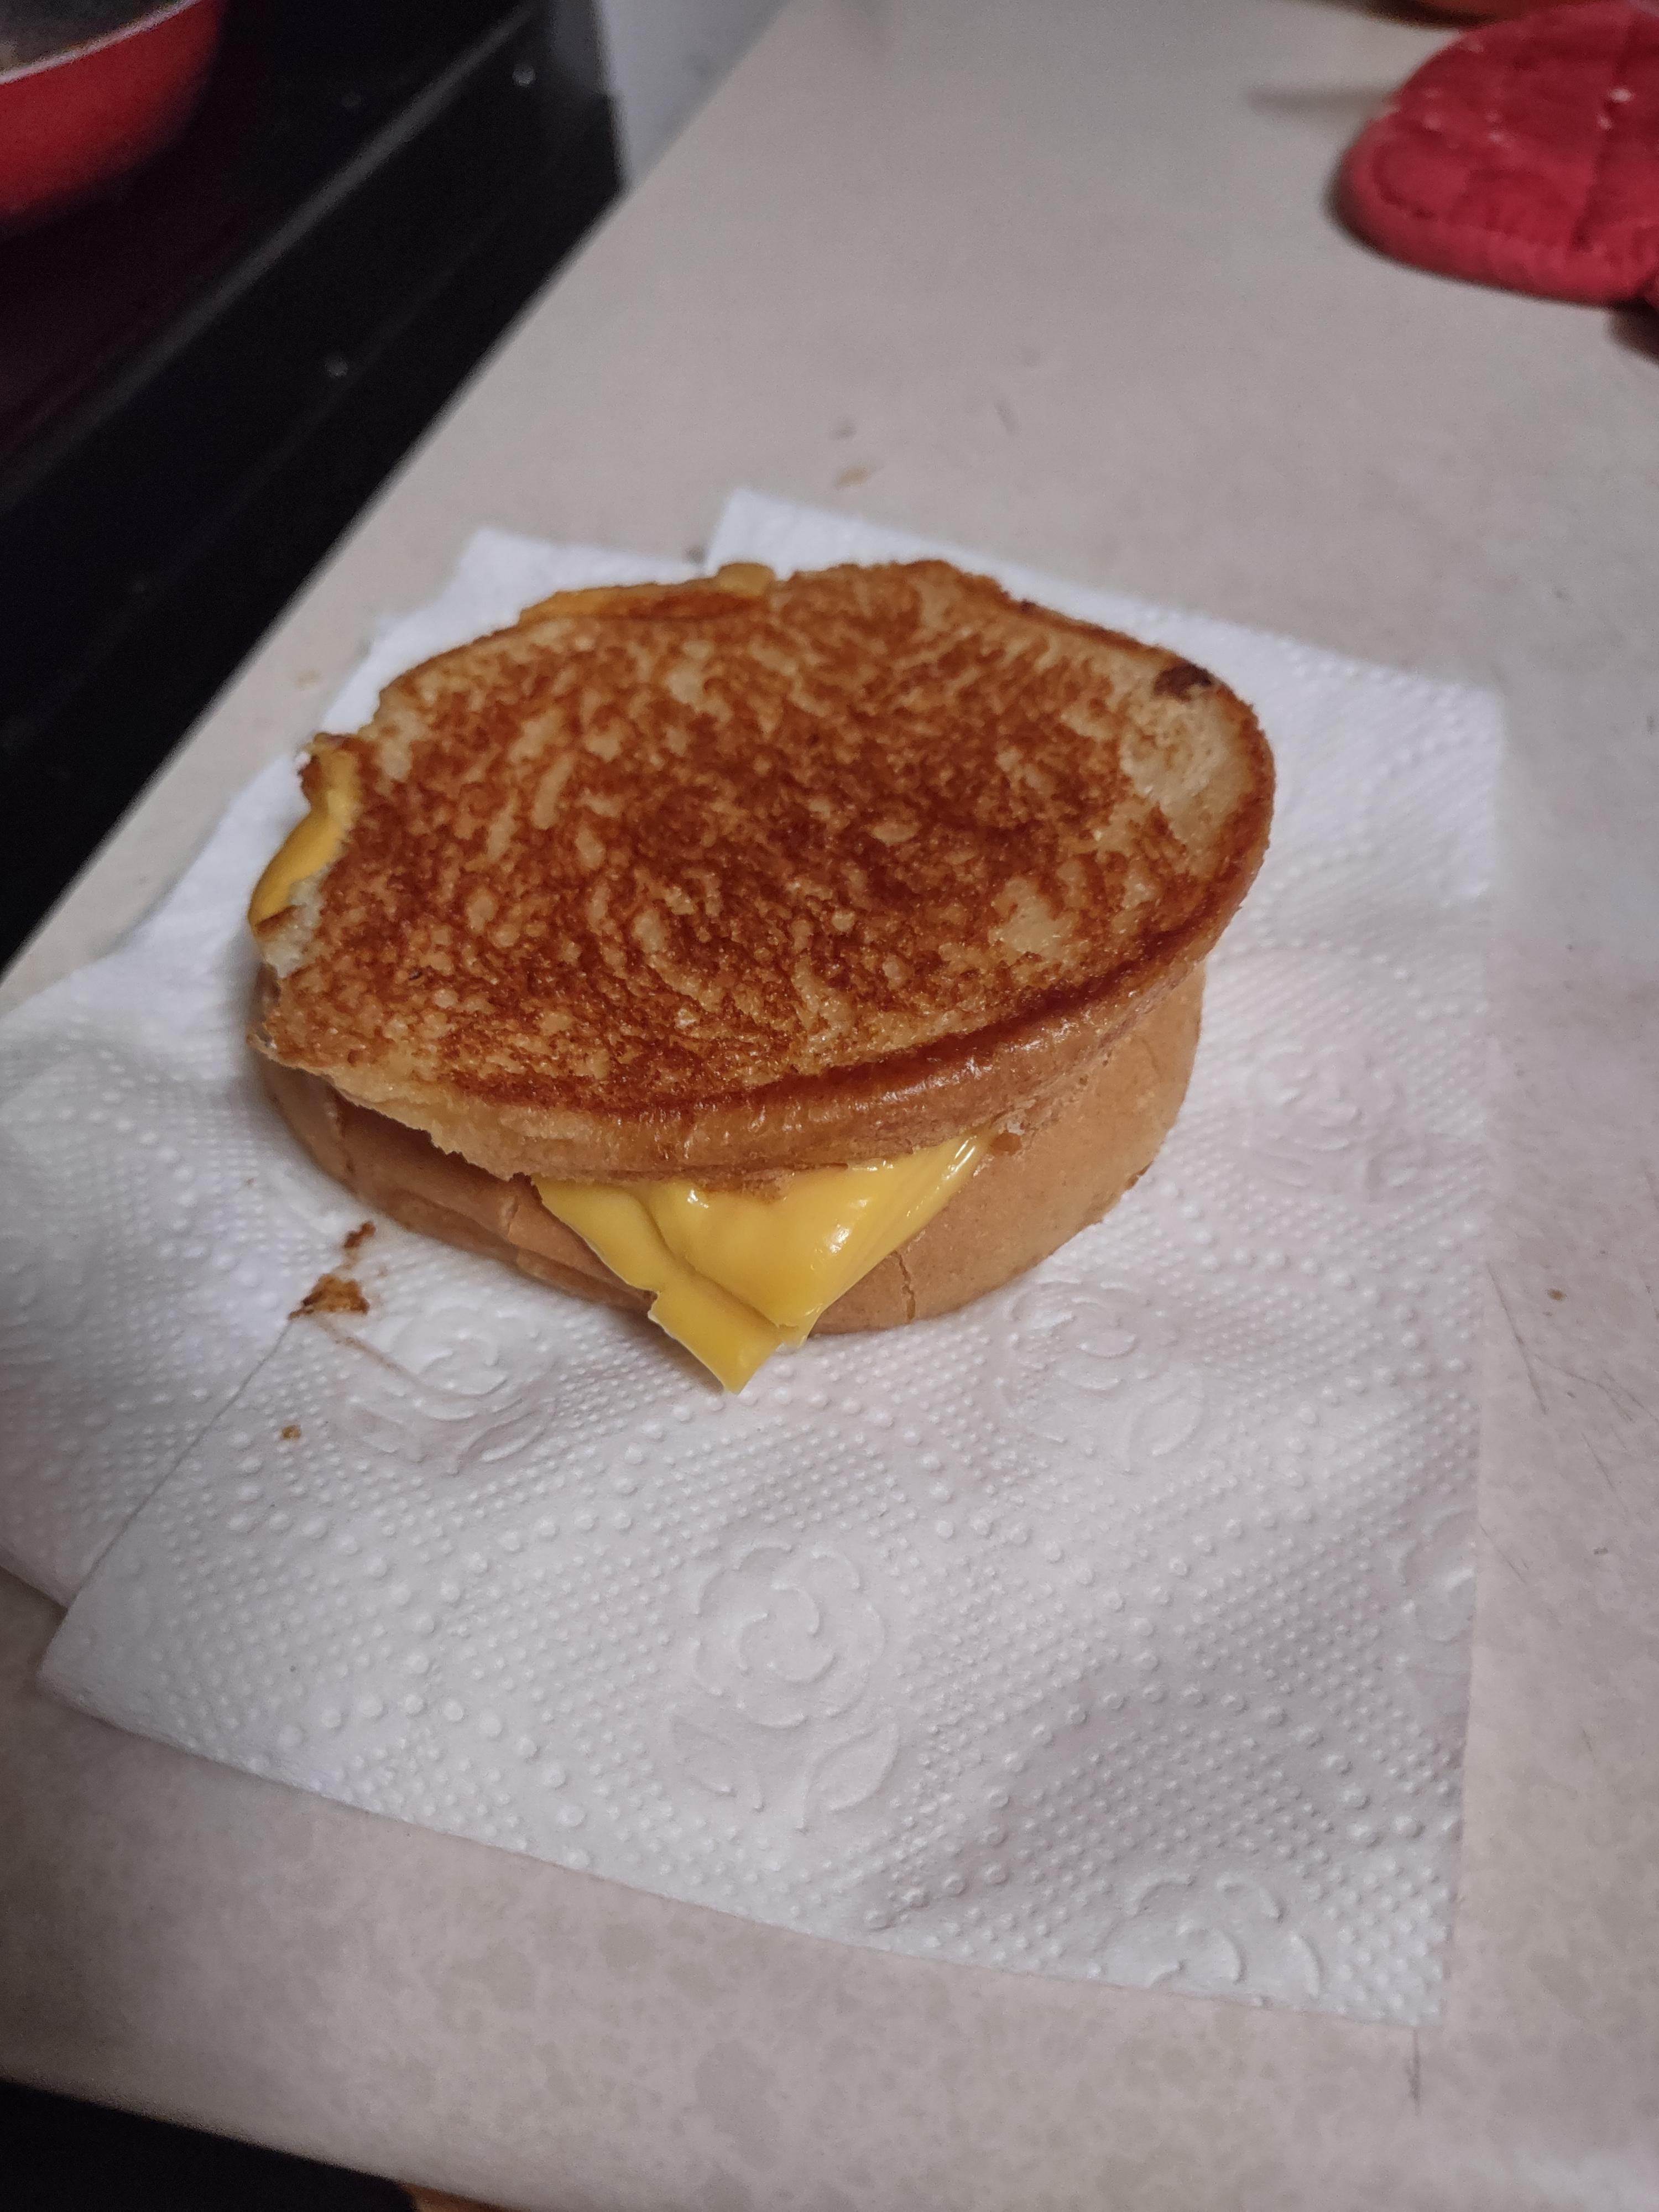 3am grilled cheese on hamburger buns served on a wad of toilet paper ...